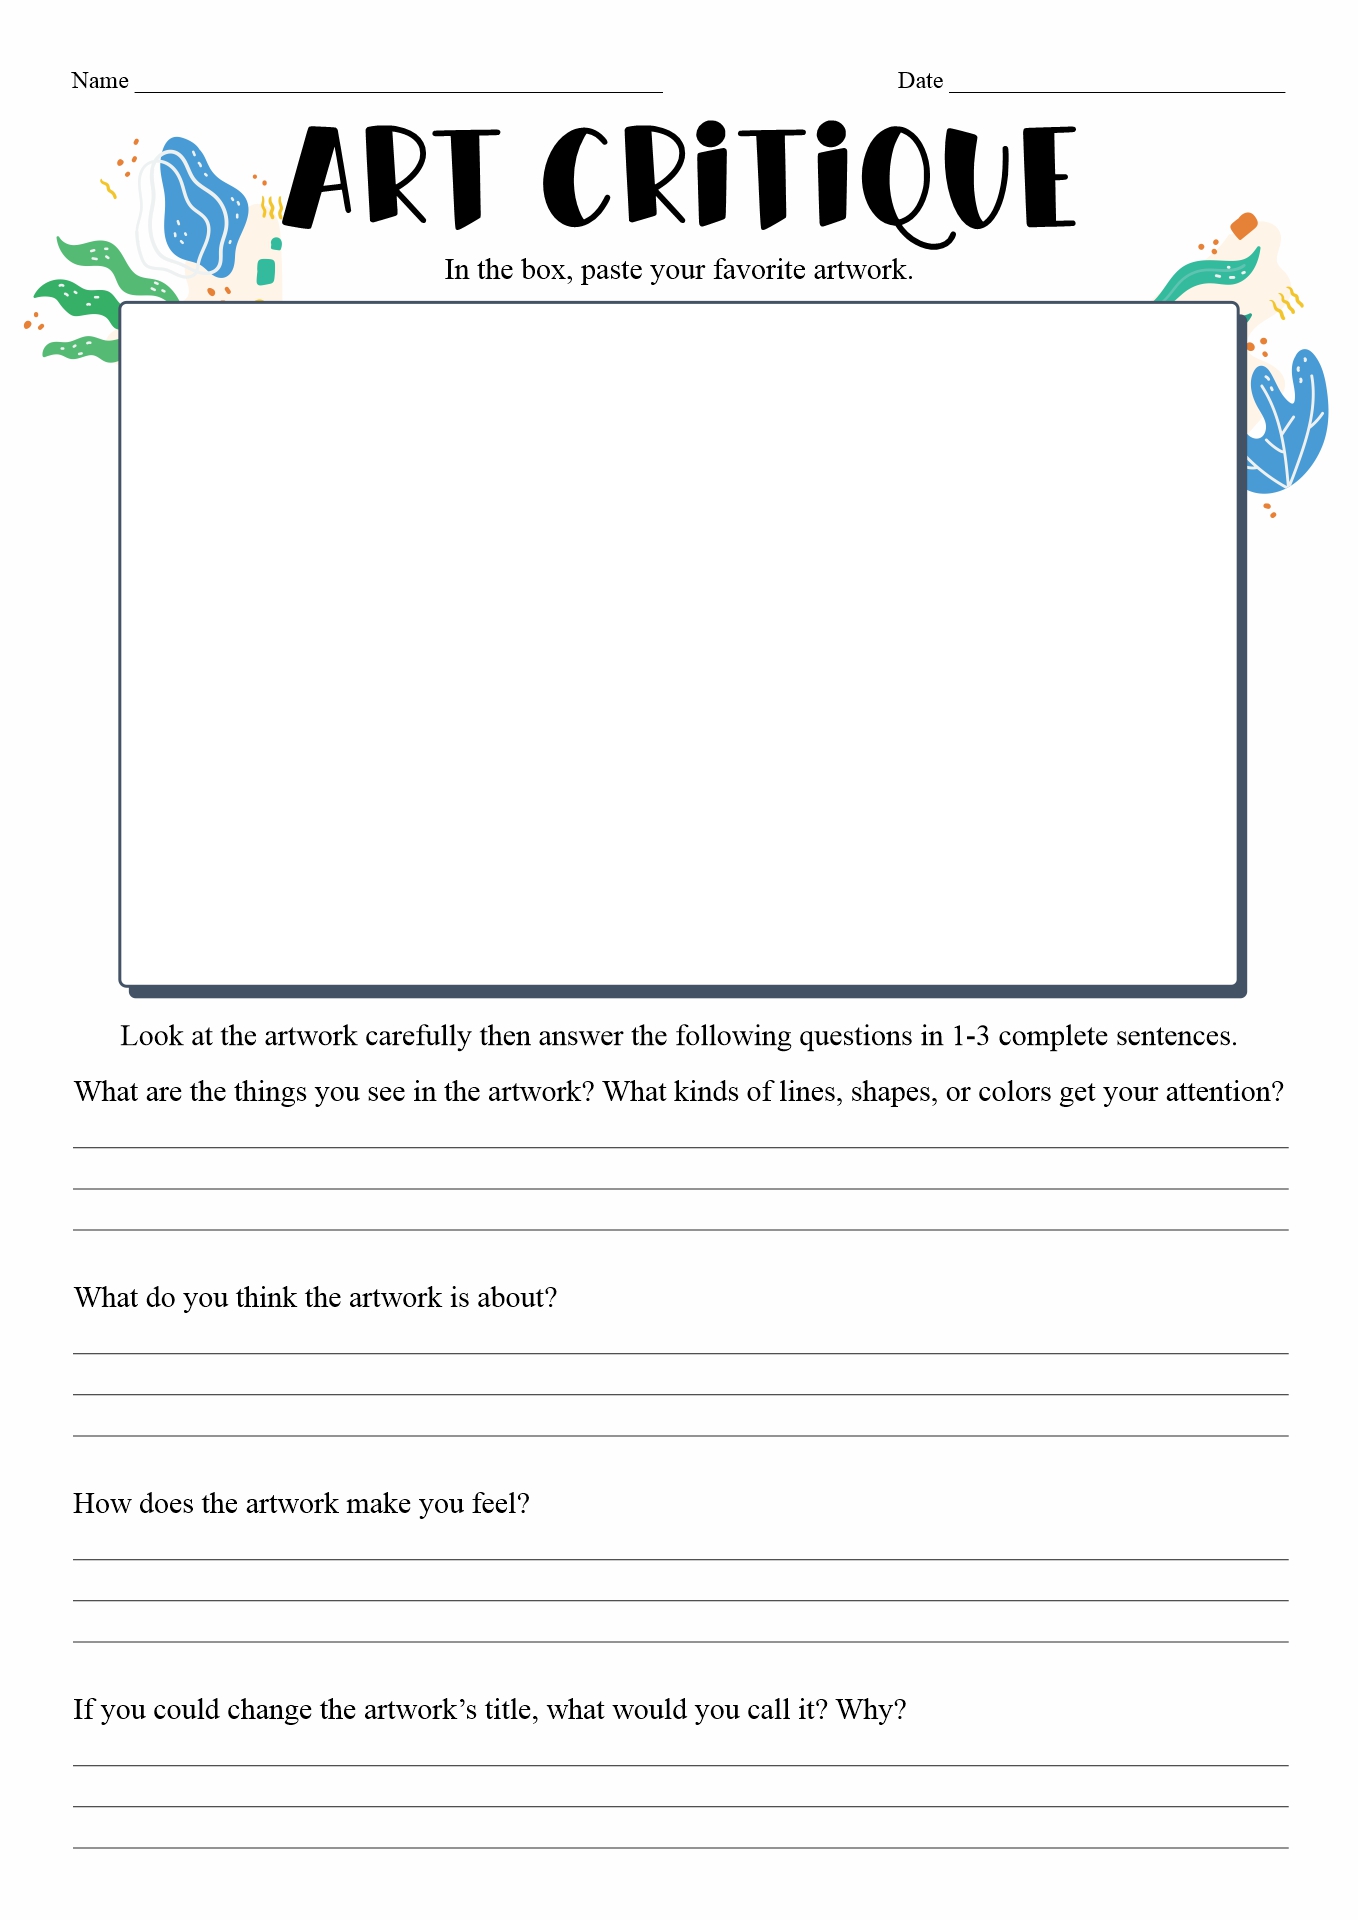 14 Best Images of Art Handouts And Worksheets Elementary Art Critique